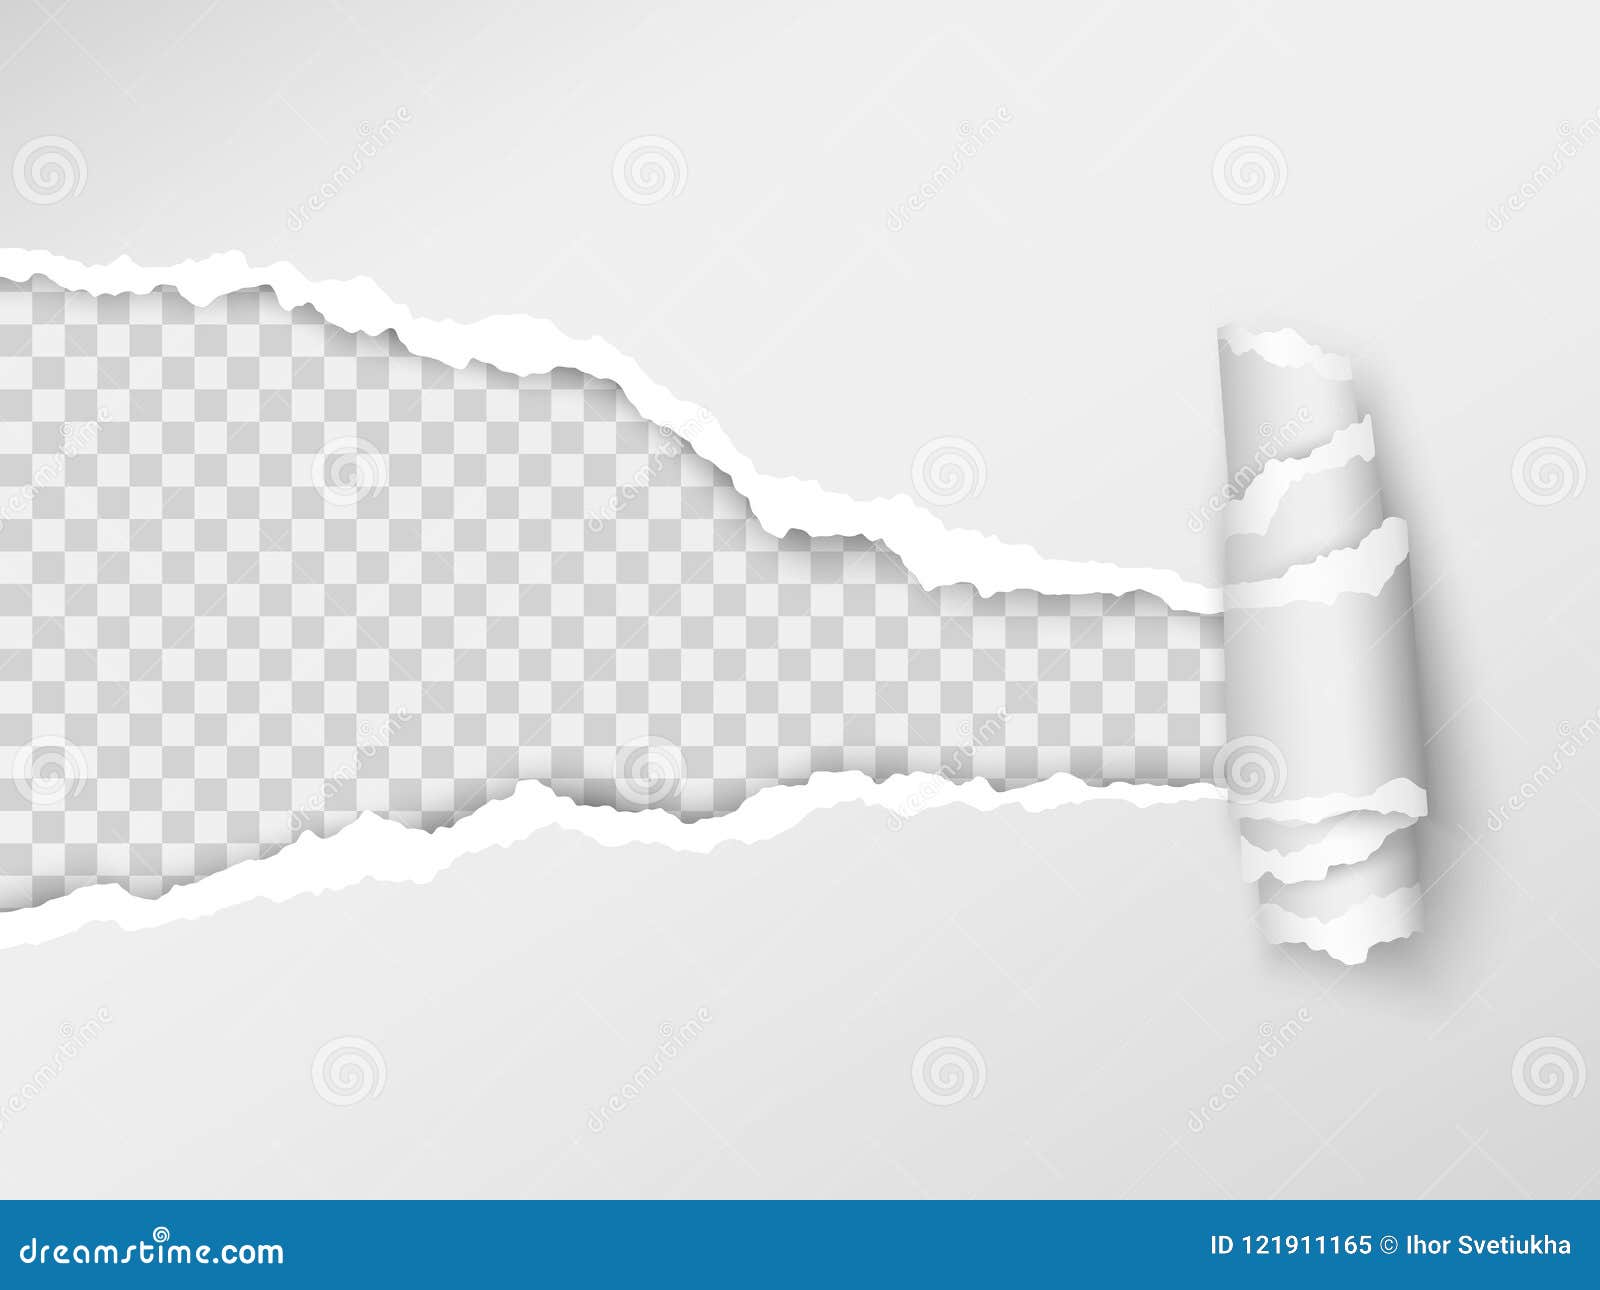 Ripped Paper PNG Transparent Images Free Download, Vector Files